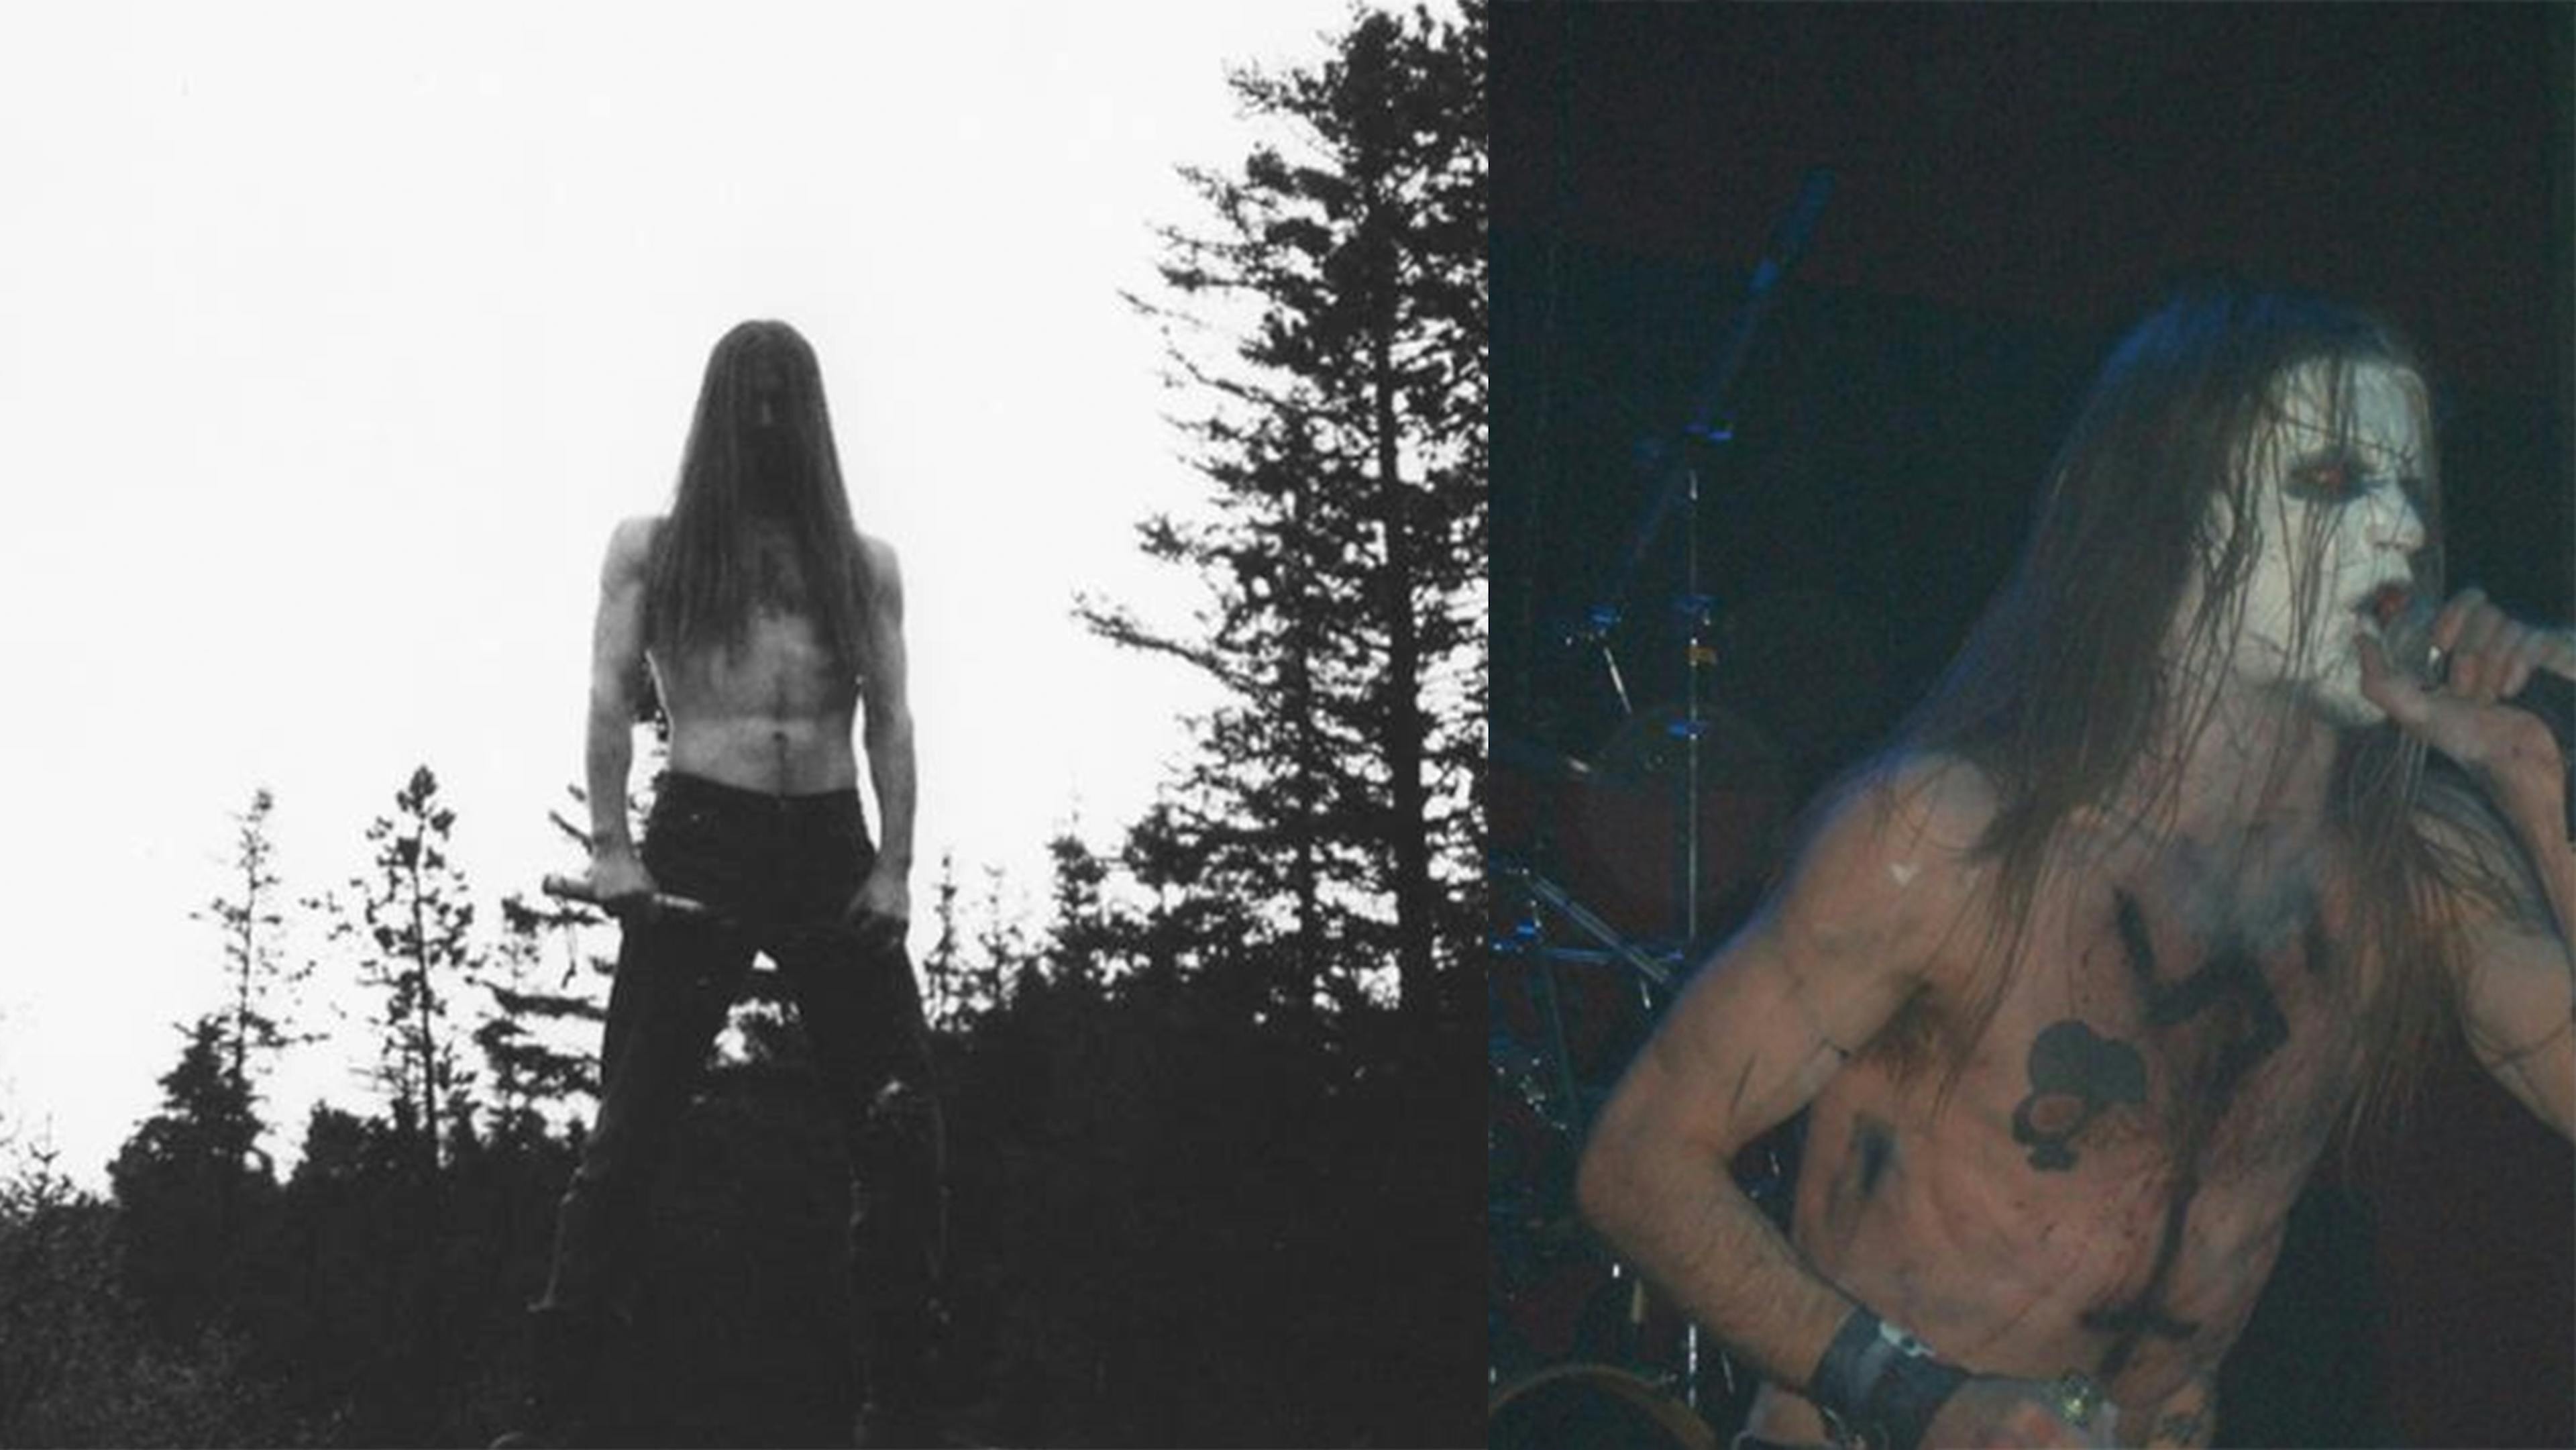 Taake Show Cancelled After Racism Allegations